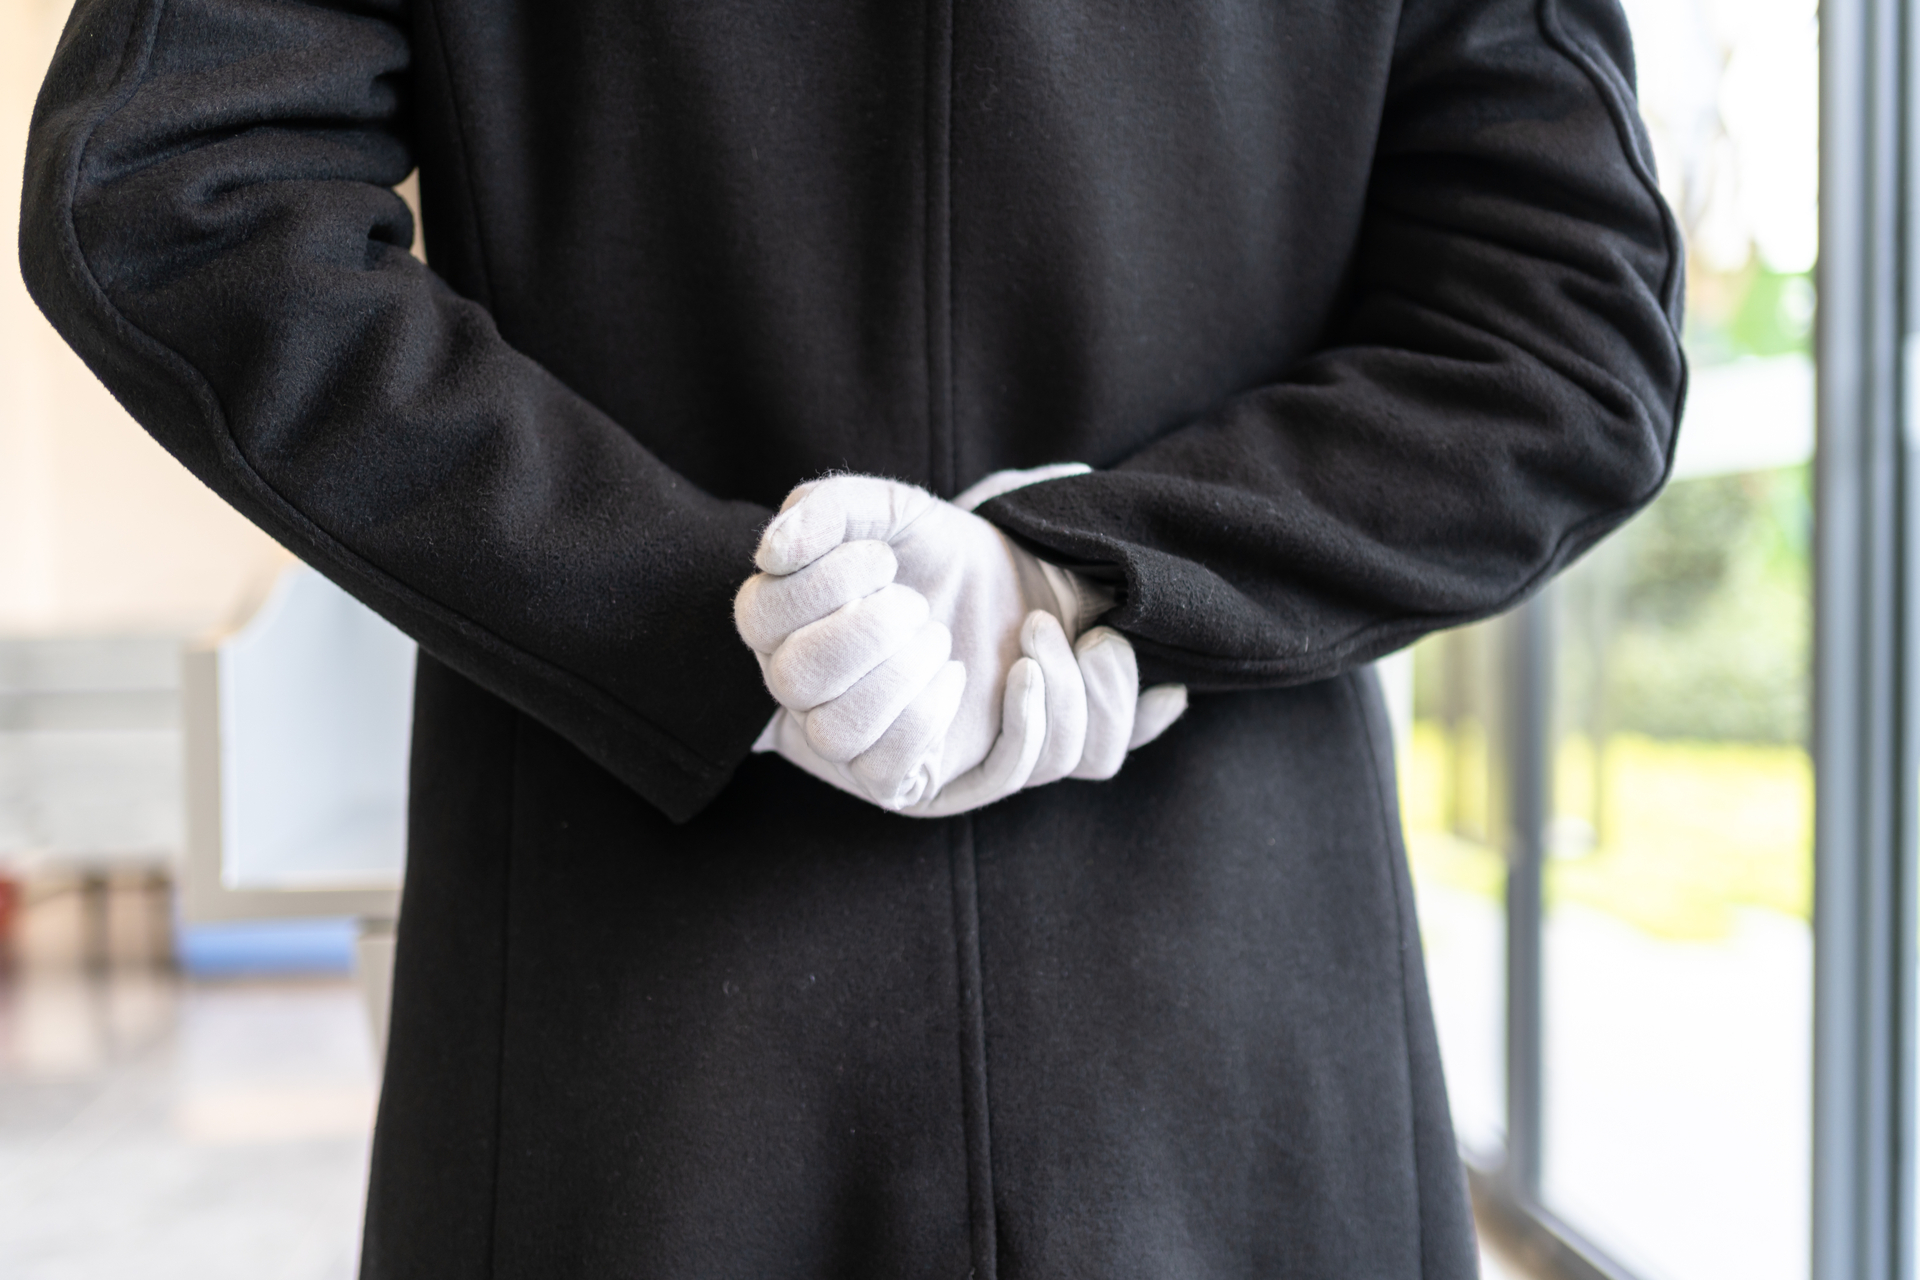 customer service person wearing white gloves